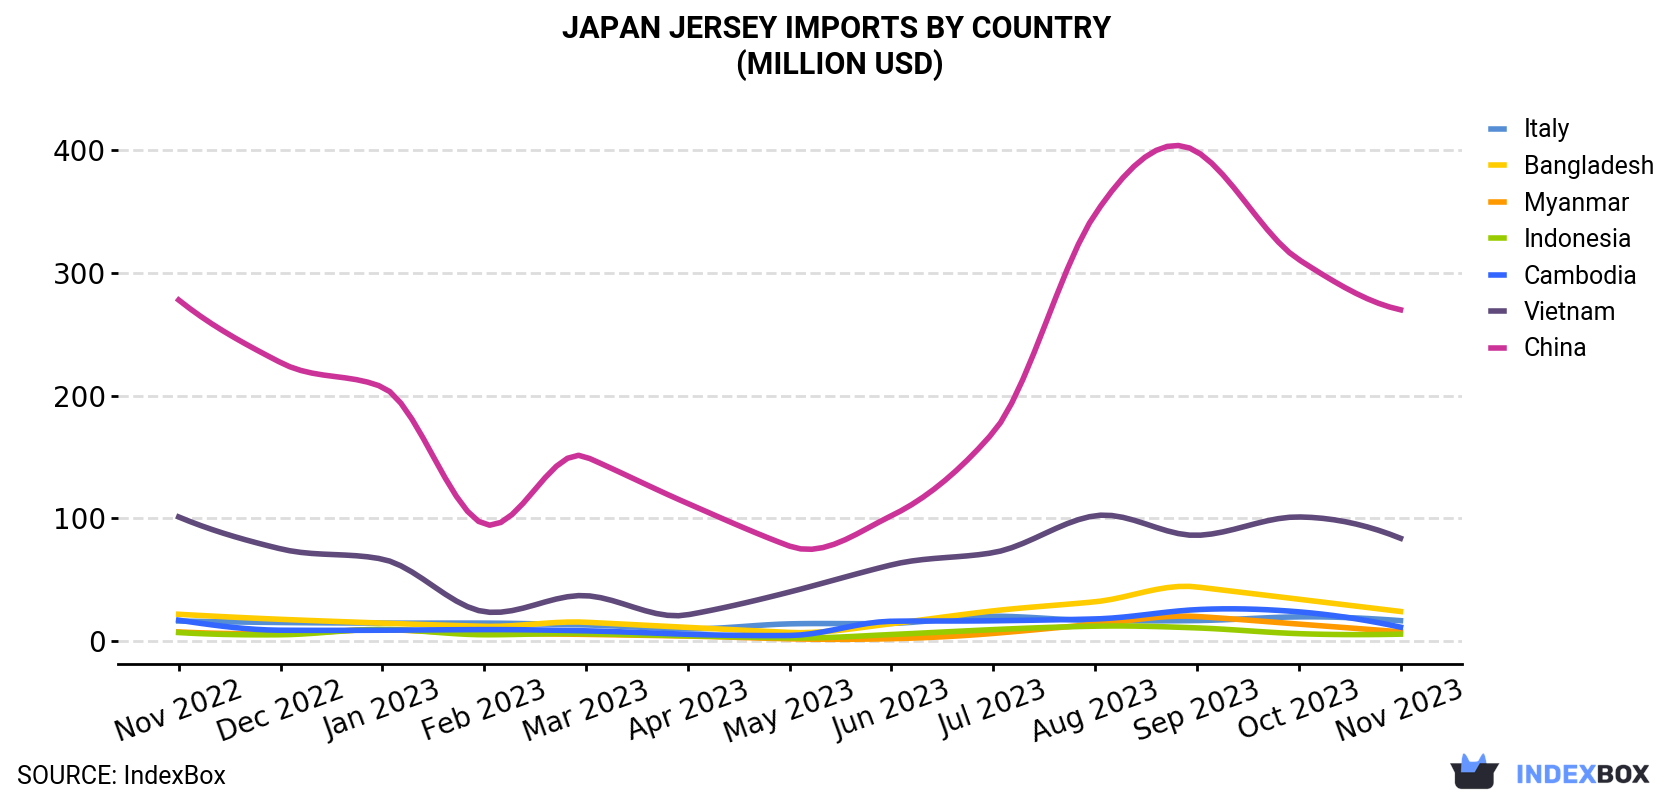 Japan Jersey Imports By Country (Million USD)